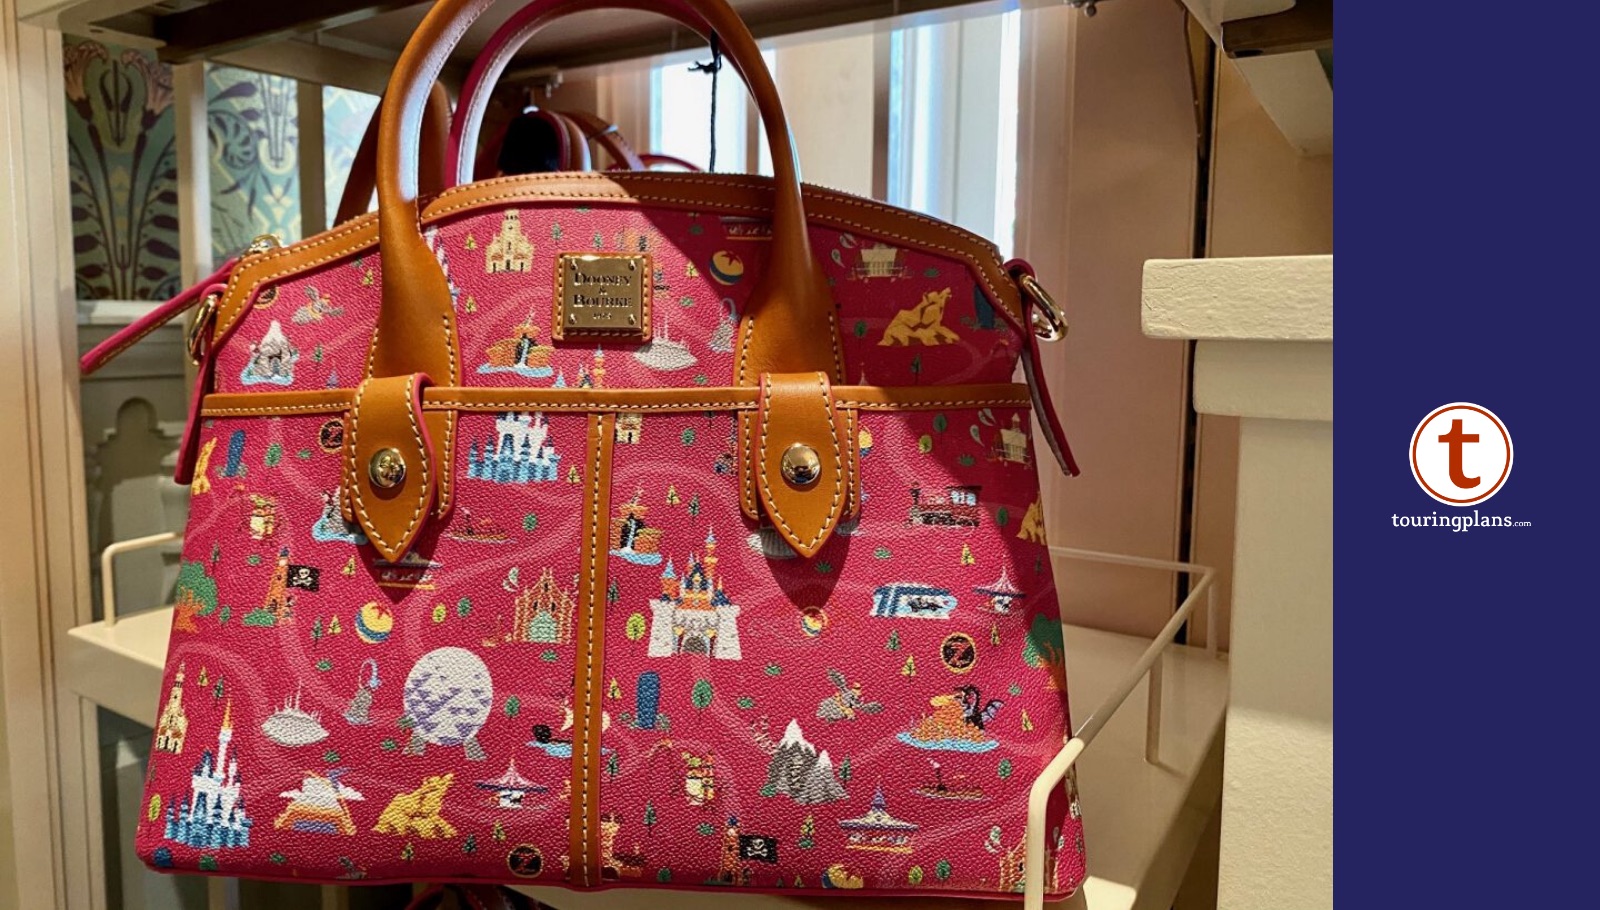 PHOTO: New Park Life Purse Collection by Dooney & Bourke Debuts This  Friday at Disney Springs - WDW News Today